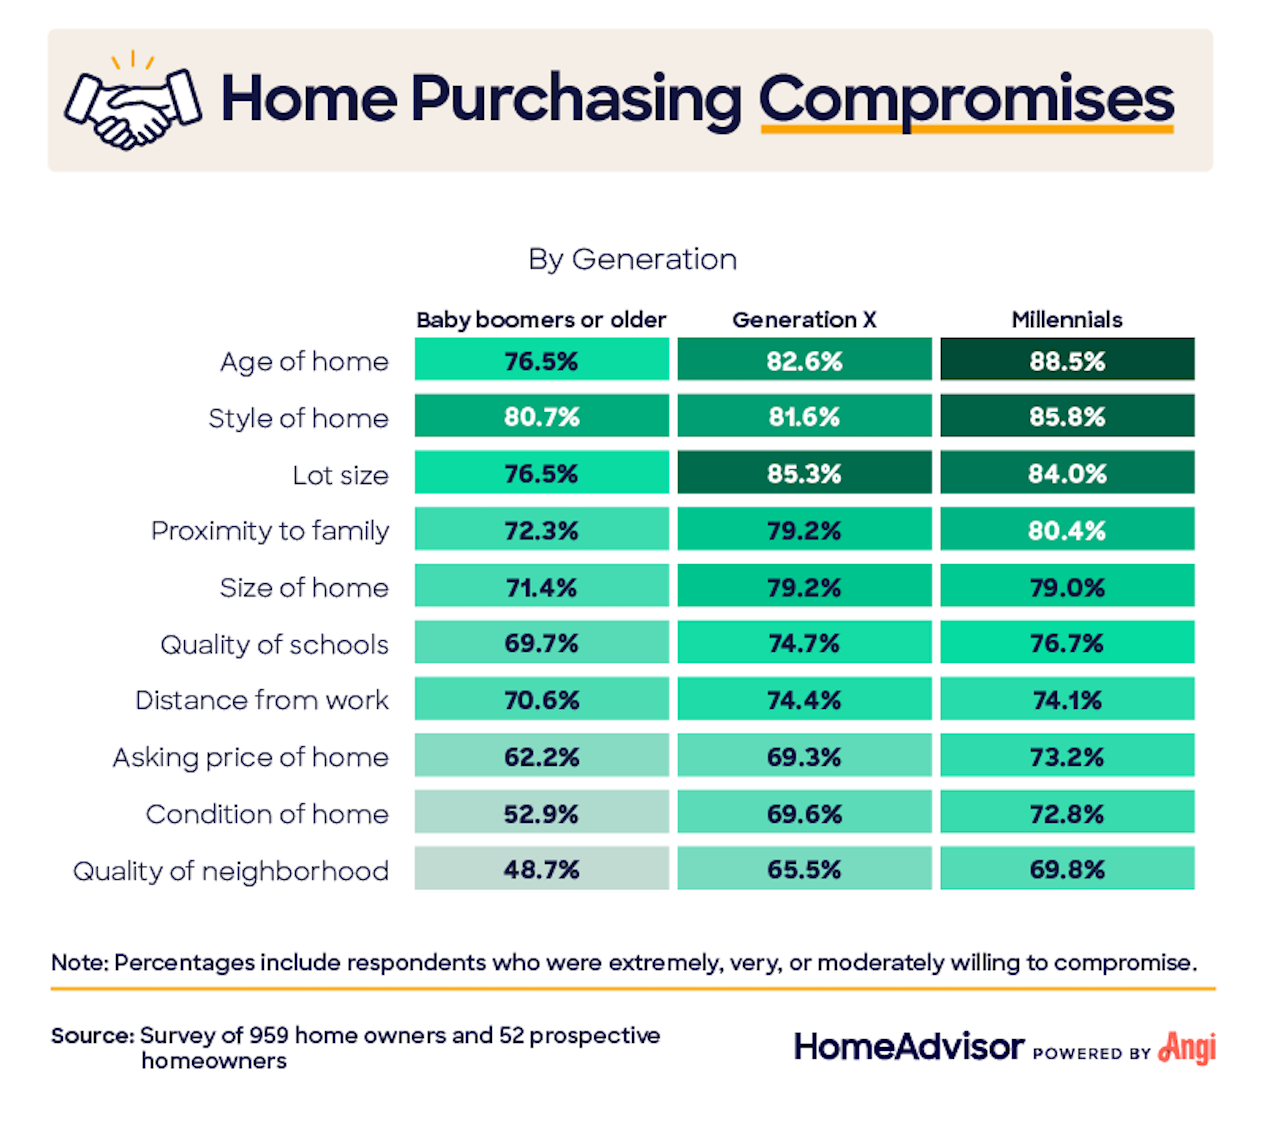 Home purchasing compromises by generation